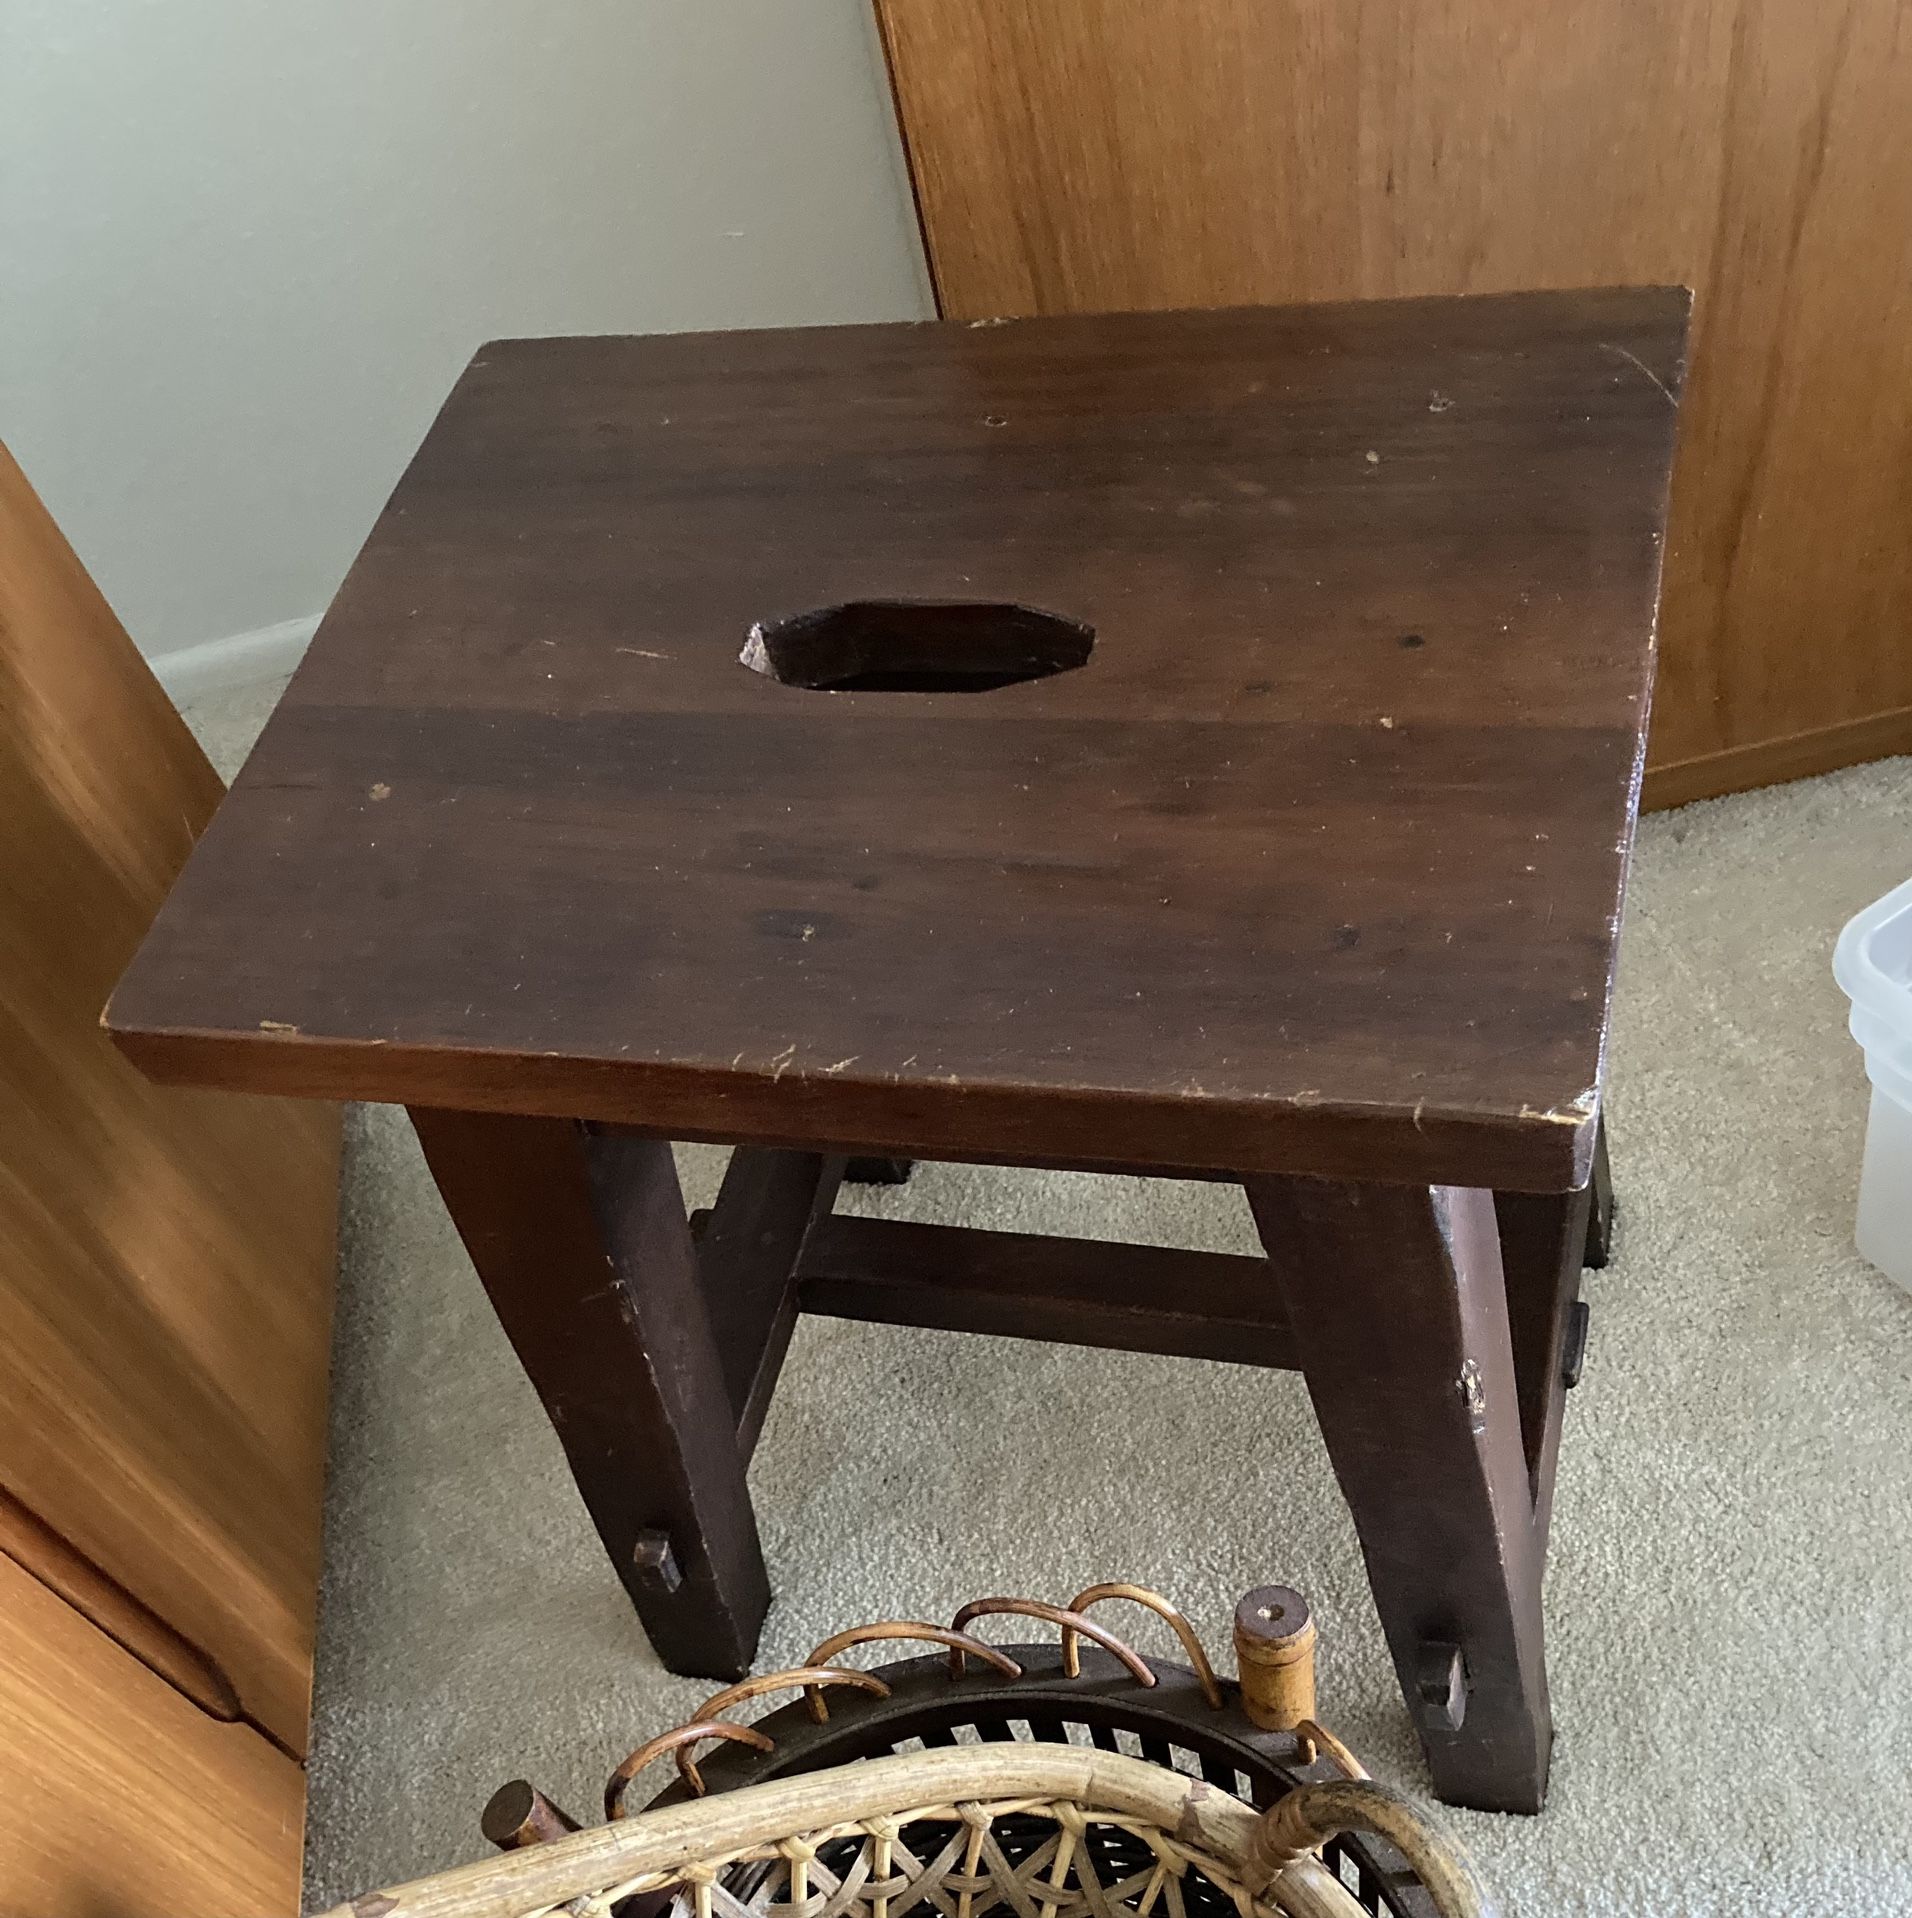 PRICE REDUCED - Dark Wooden Table - Pottery Barn  - PRICE REDUCED - 